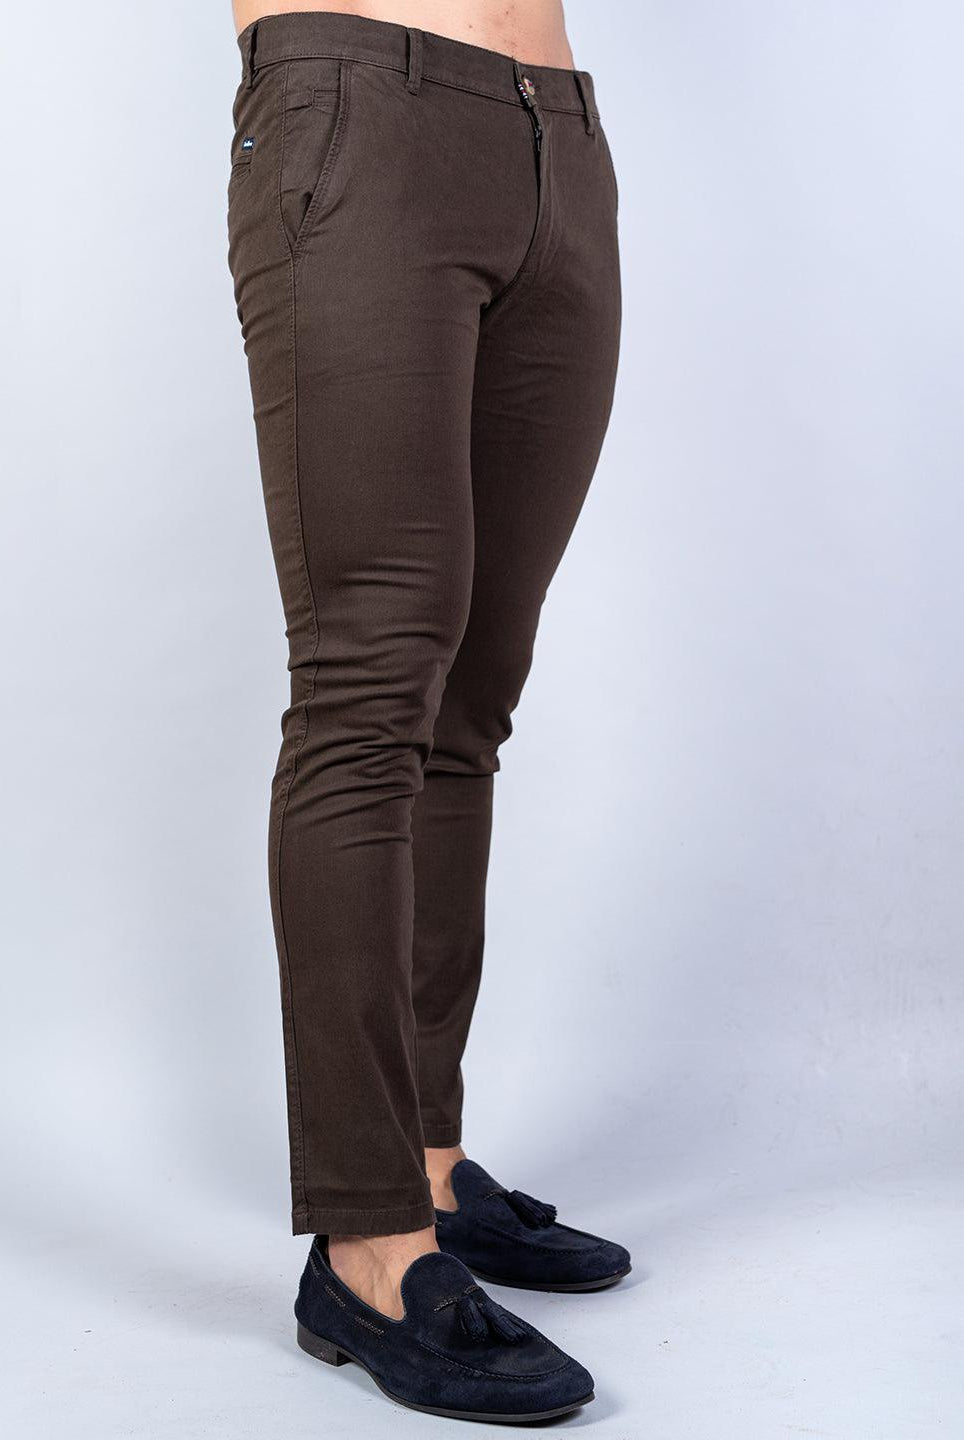 Brown Solid Cotton Twill Trouser - Tistabene